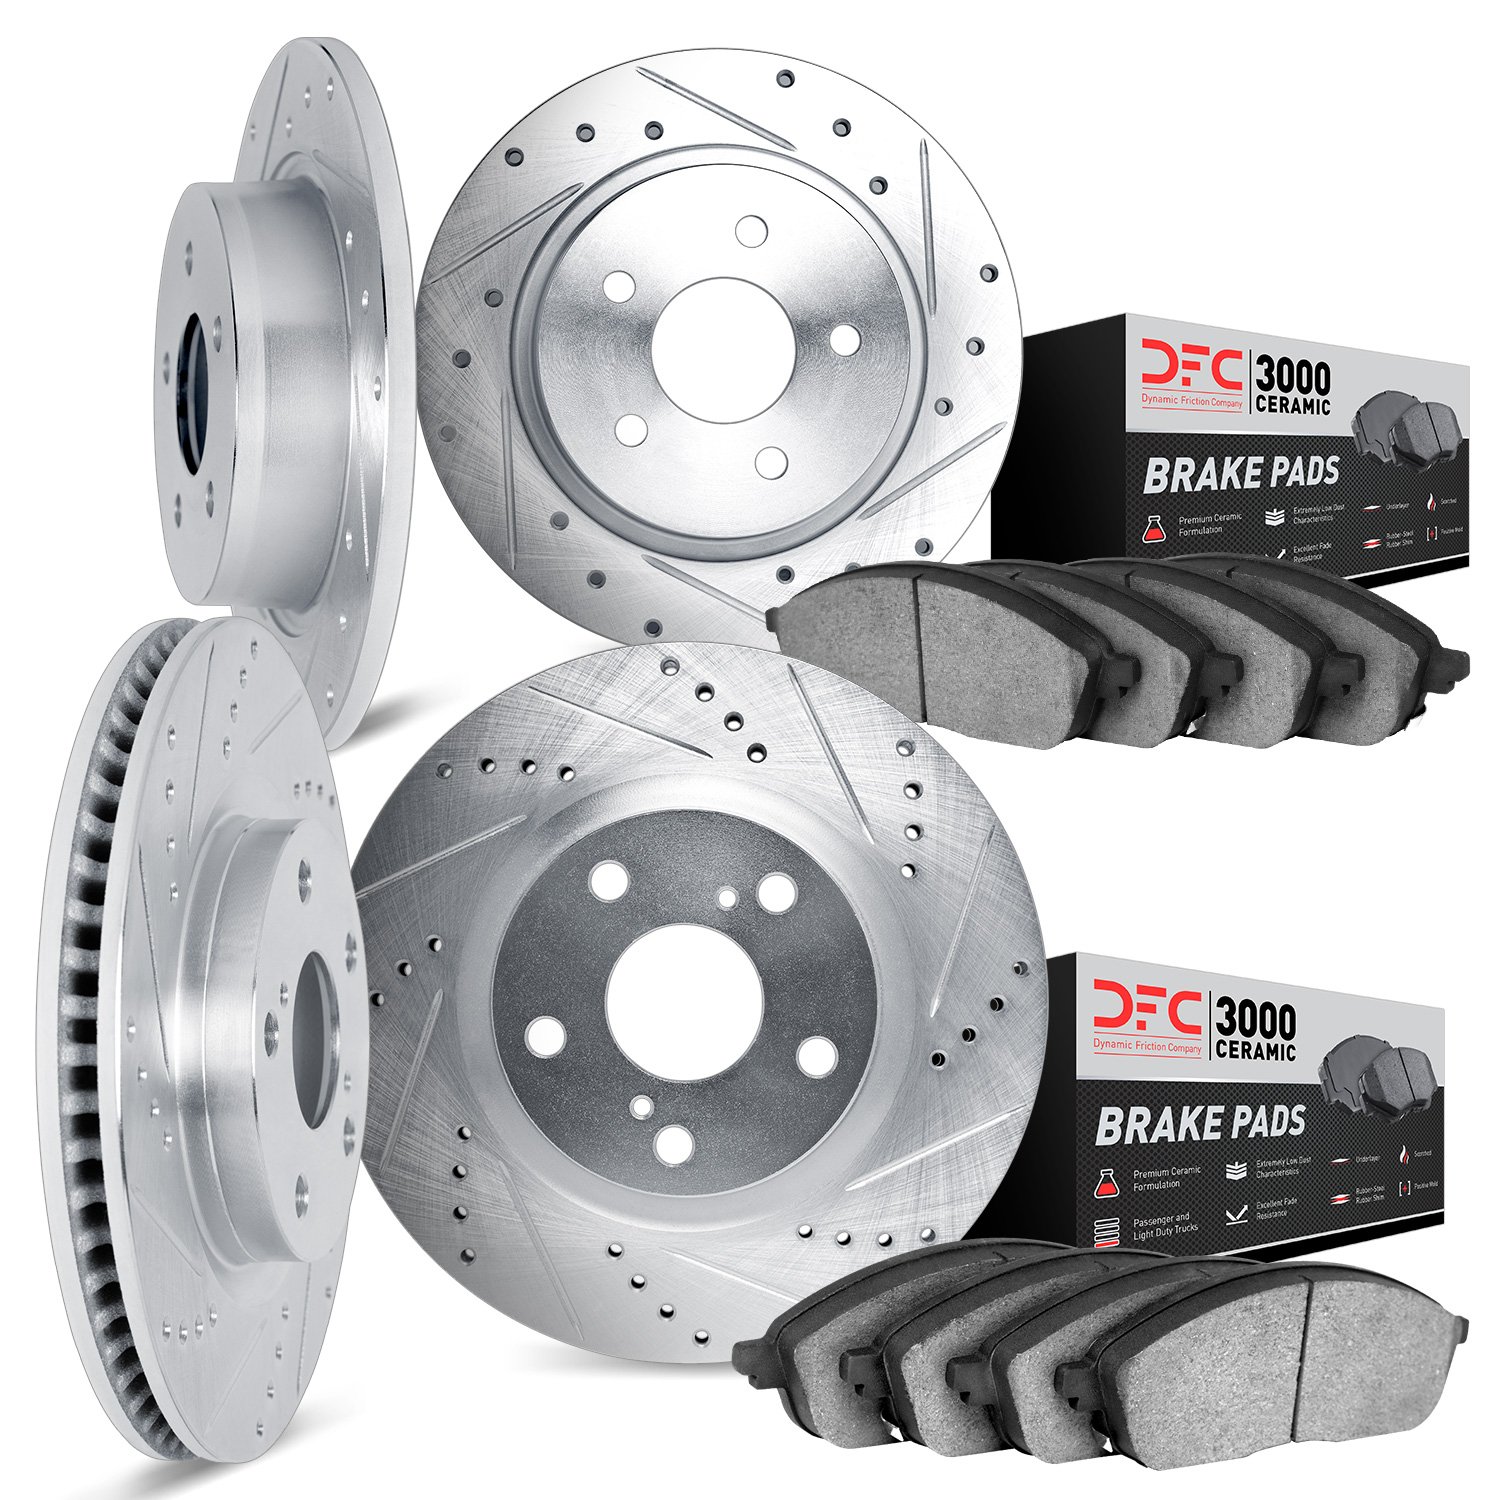 7304-56017 Drilled/Slotted Brake Rotor with 3000-Series Ceramic Brake Pads Kit [Silver], 1998-2002 Ford/Lincoln/Mercury/Mazda, P